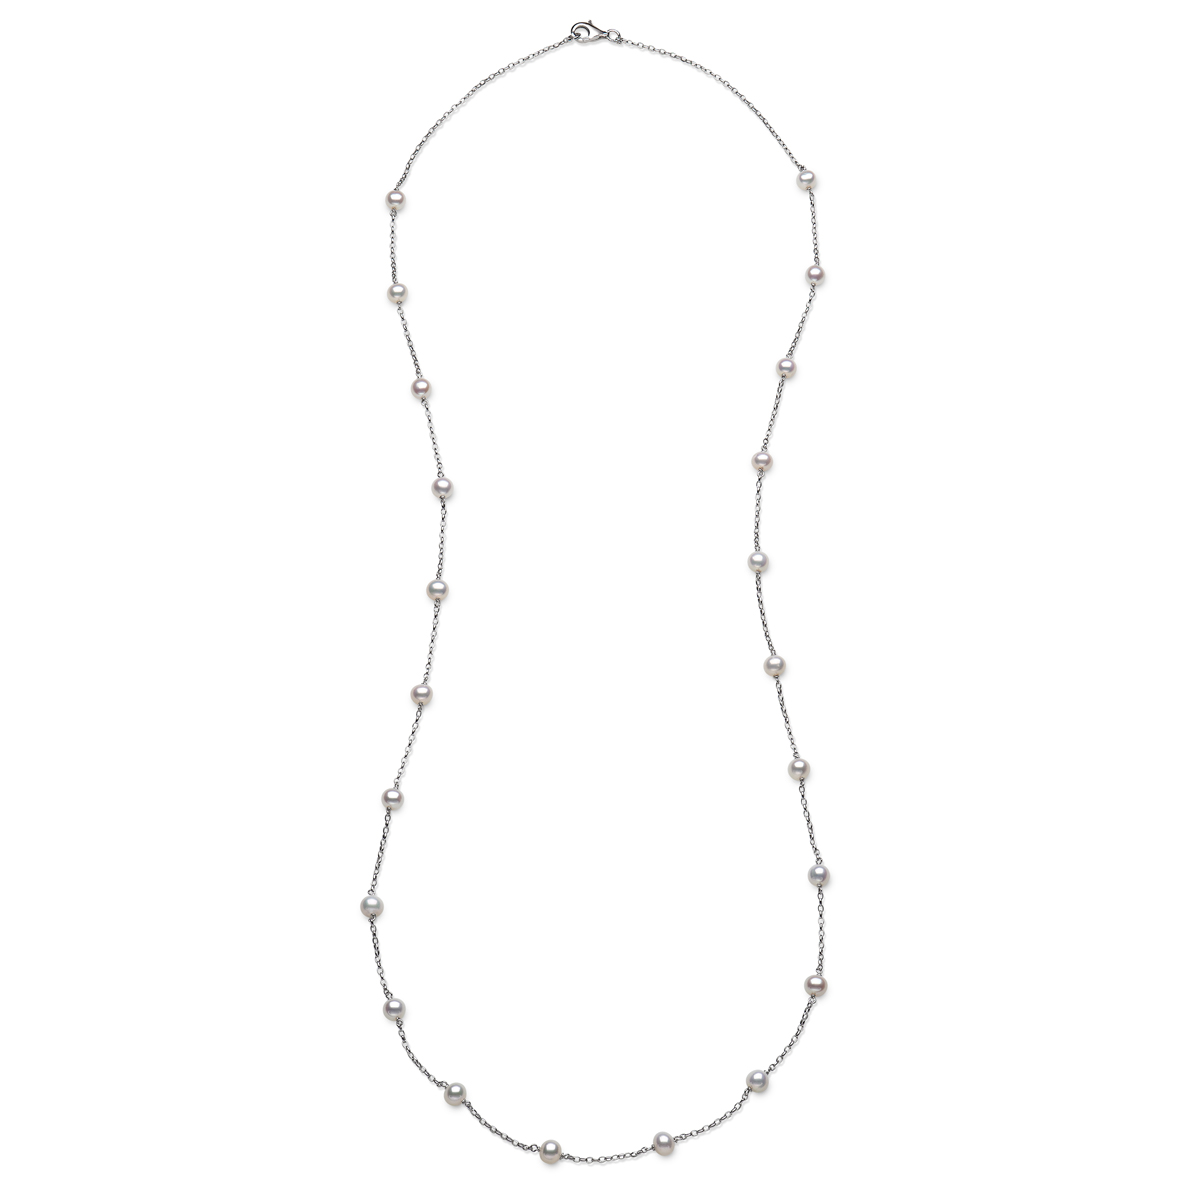 Sterling Silver Tincup Pearl Necklace On An Oval Link Chain Measuring 36" Long With A Lobster Clasp